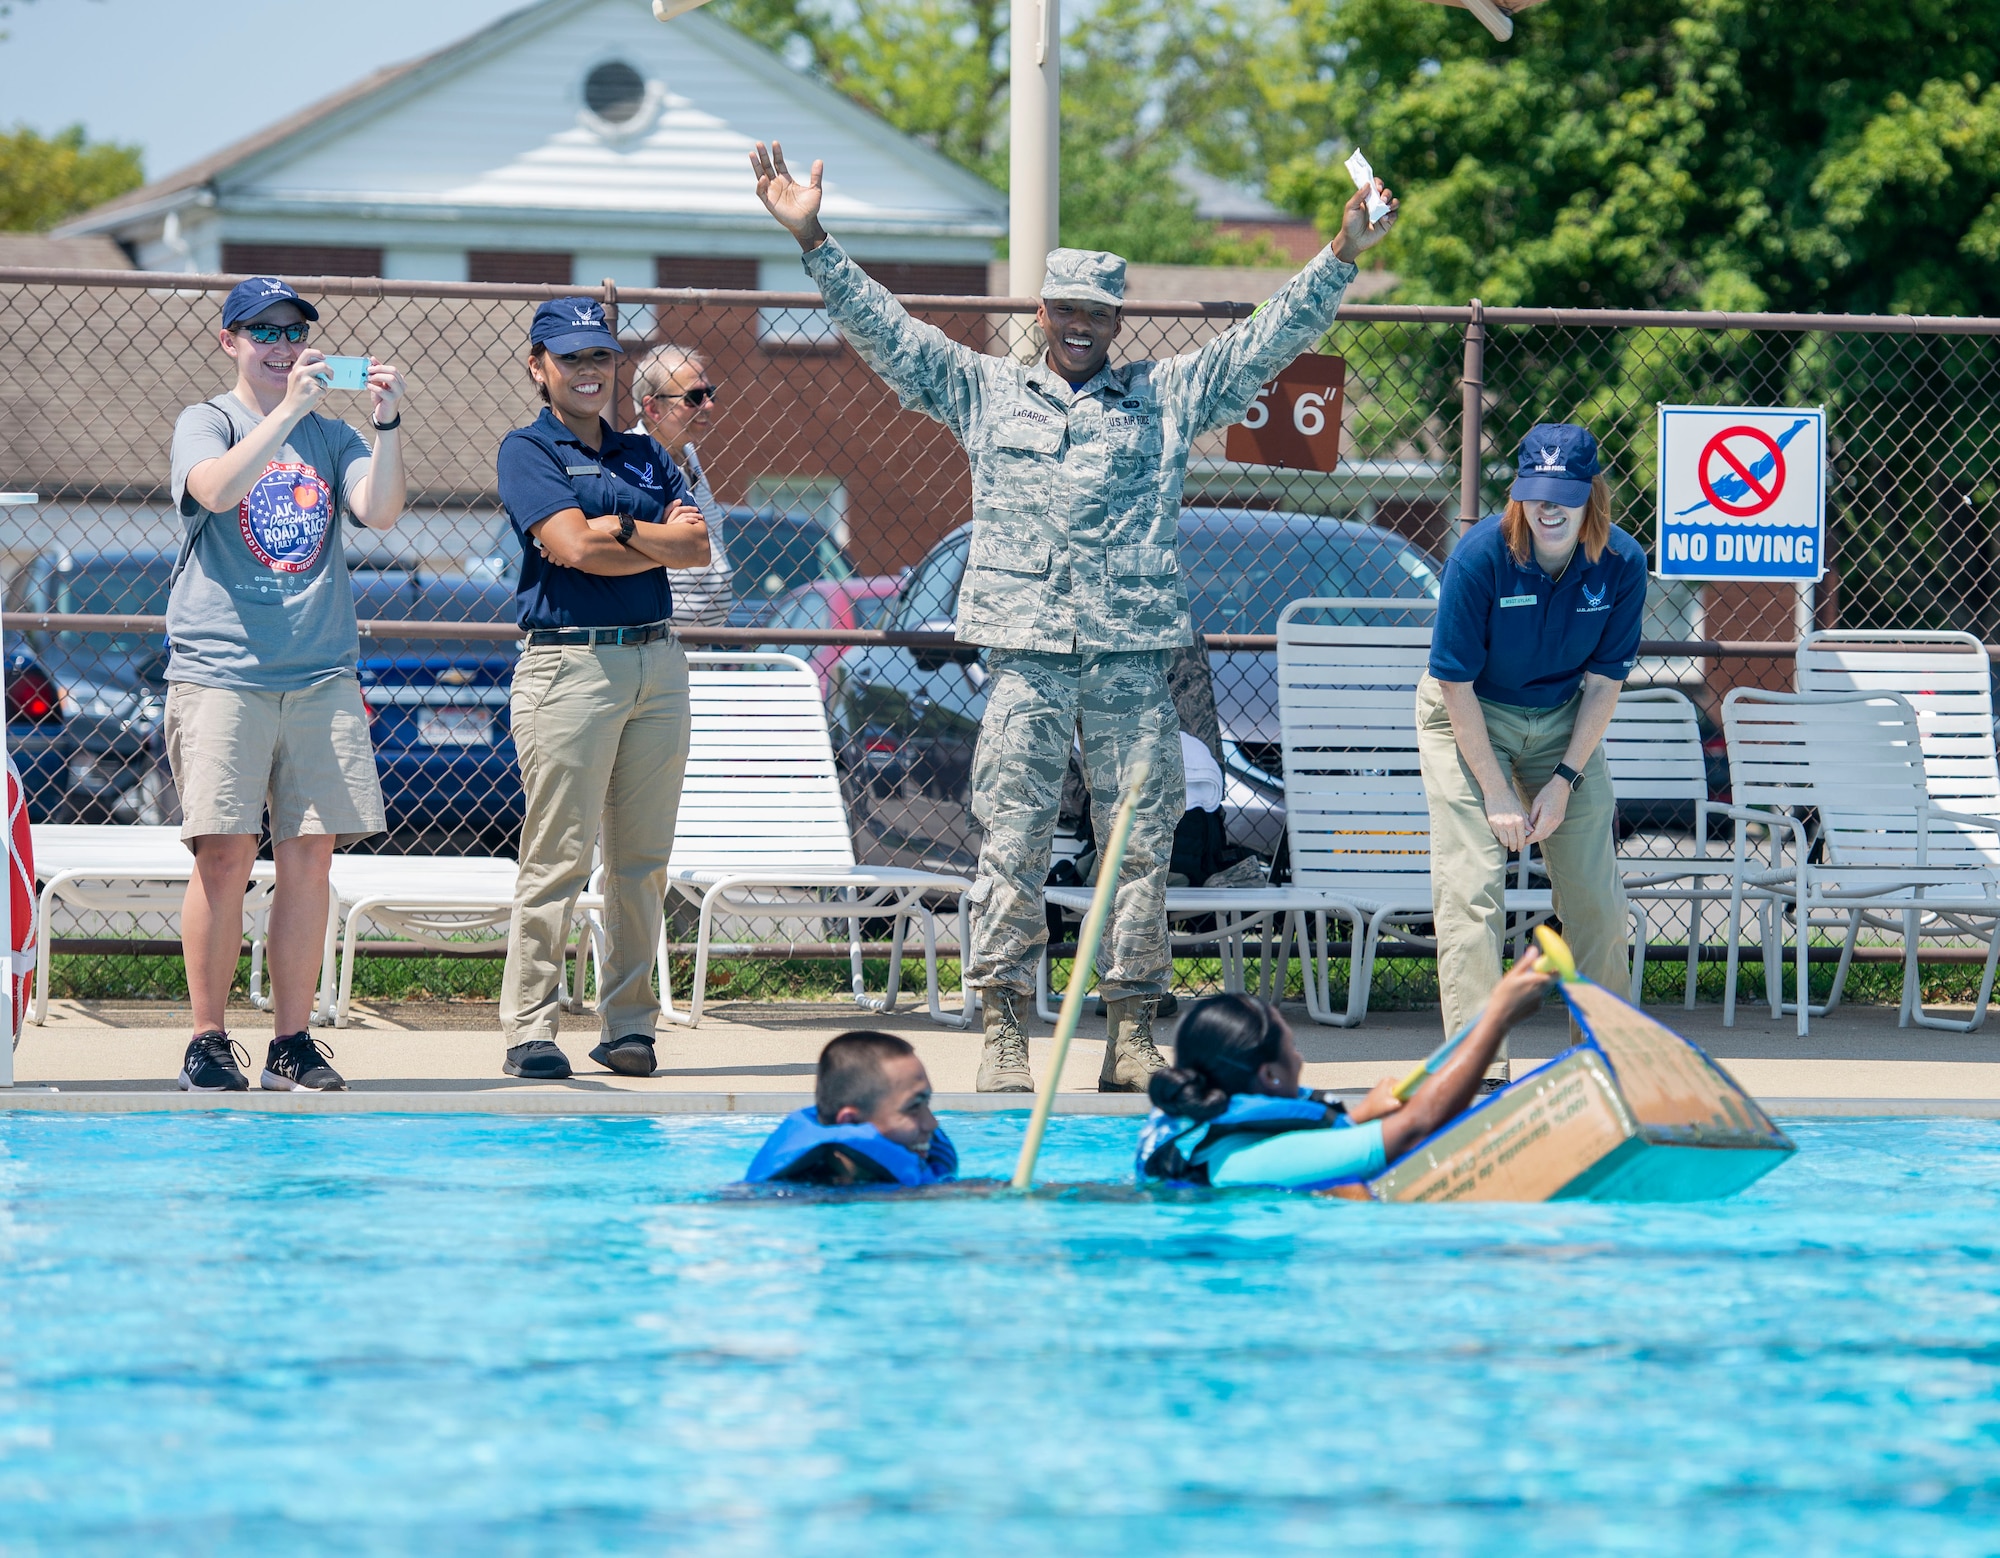 Staff Sgt. Kenneth LaGarde, 375th Force Support Squadron,cheers on members of the 375th FSS as they sink.